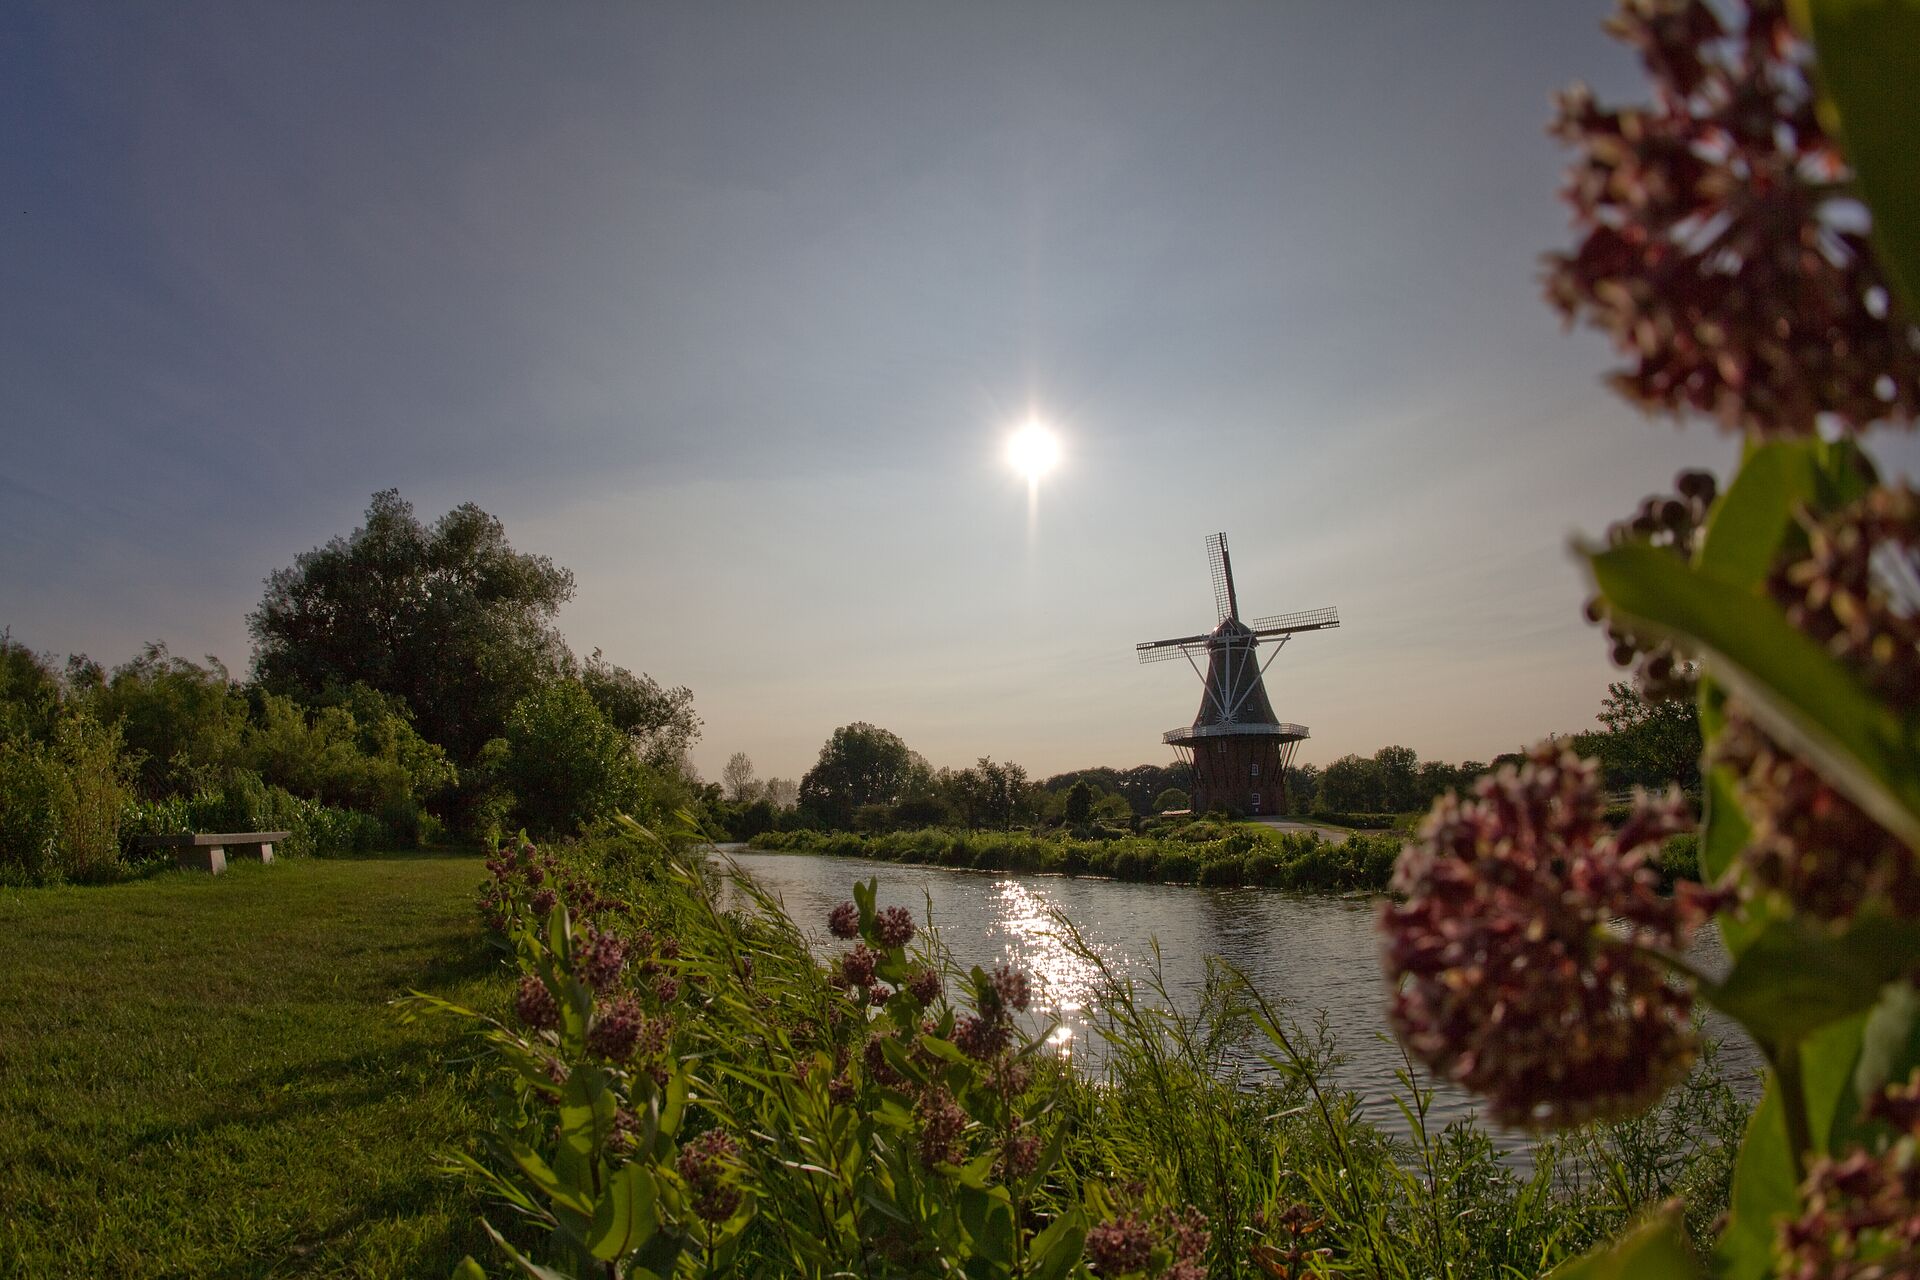 Scenic view of a windmill by a stream.